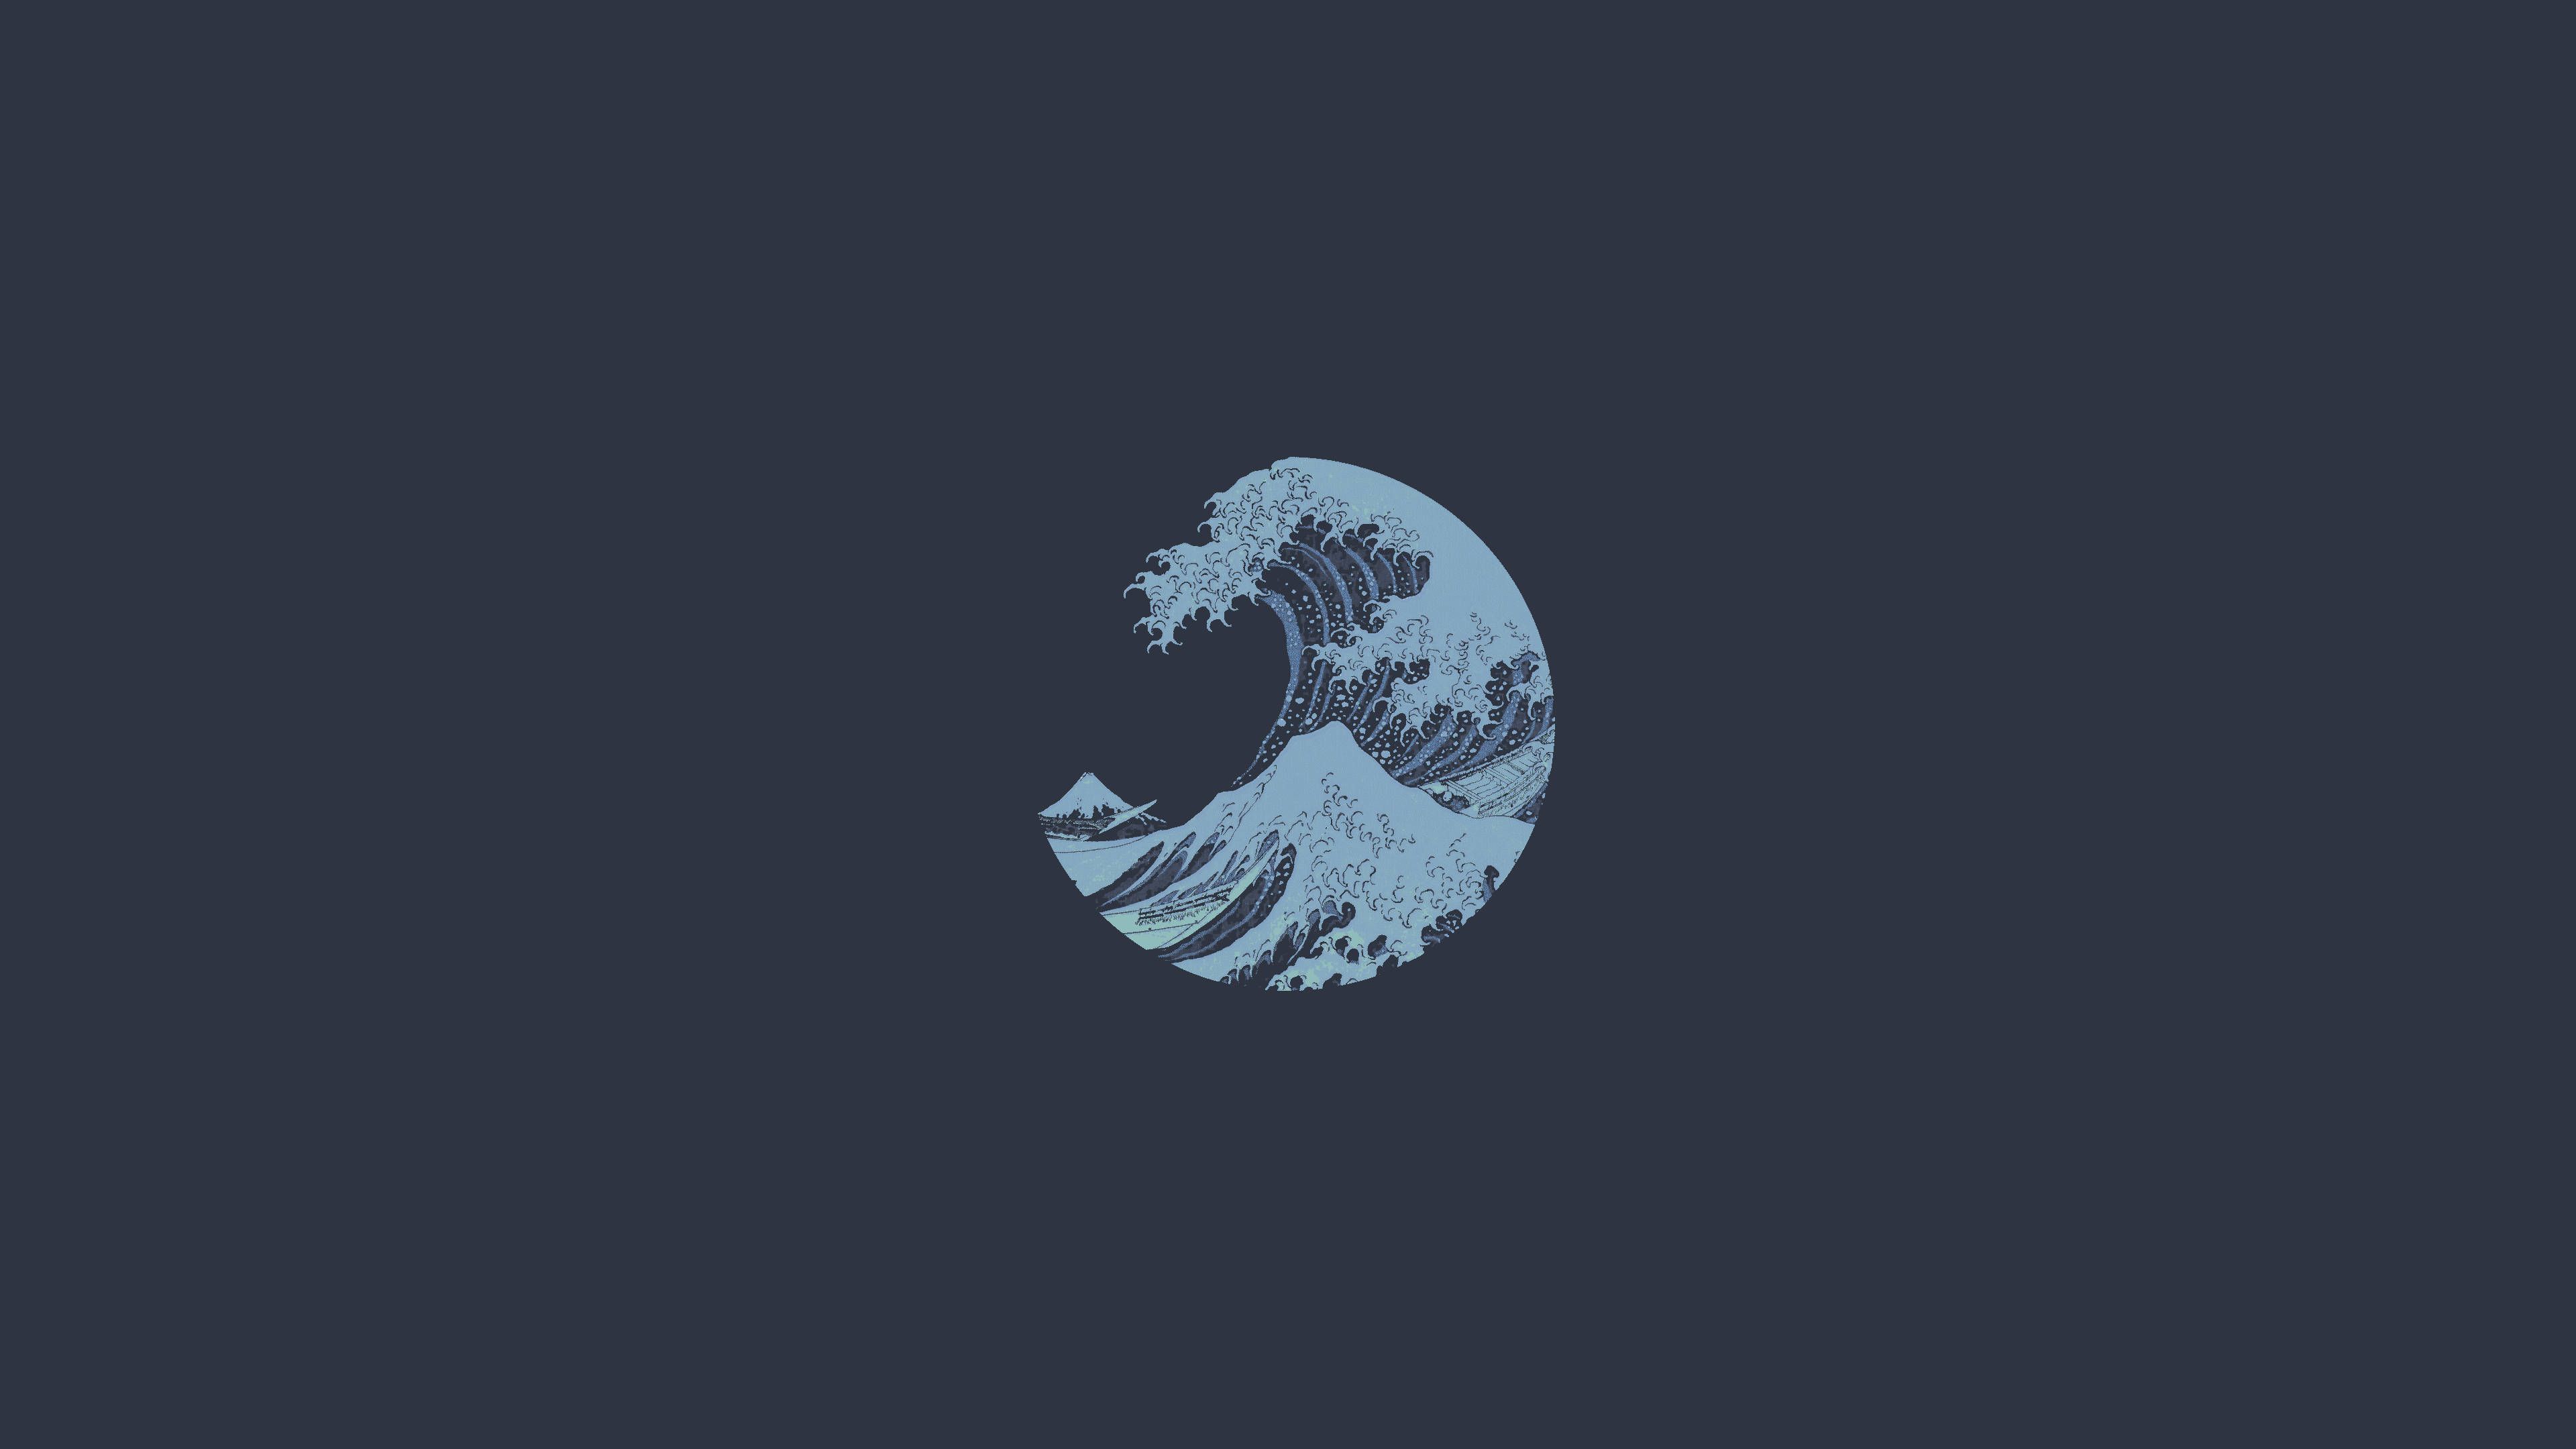 Download The Great Wave Minimalist Aesthetic Laptop Wallpaper